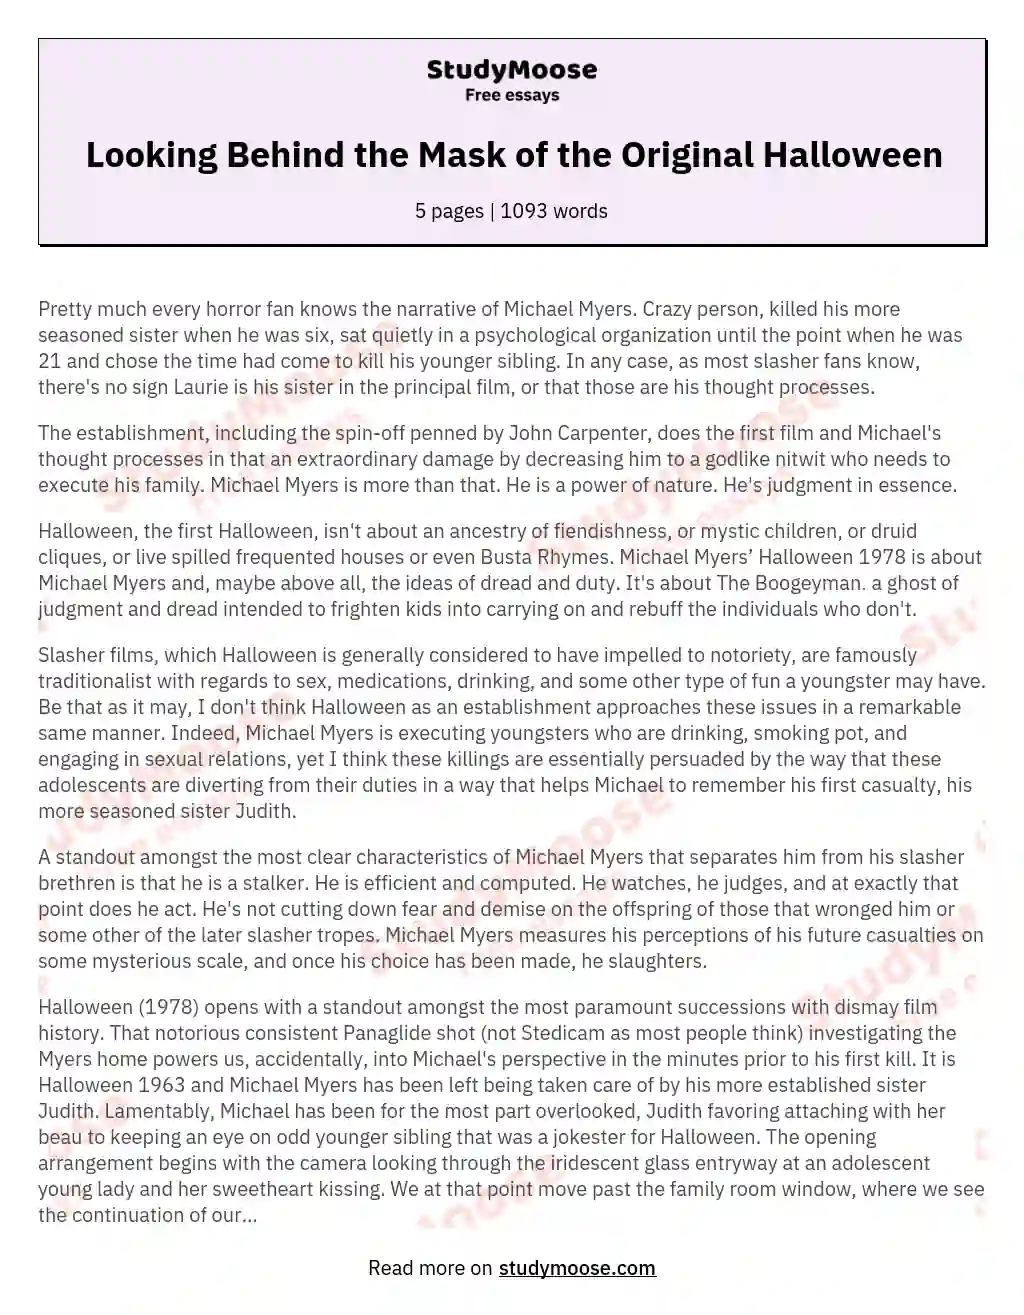 Looking Behind the Mask of the Original Halloween essay